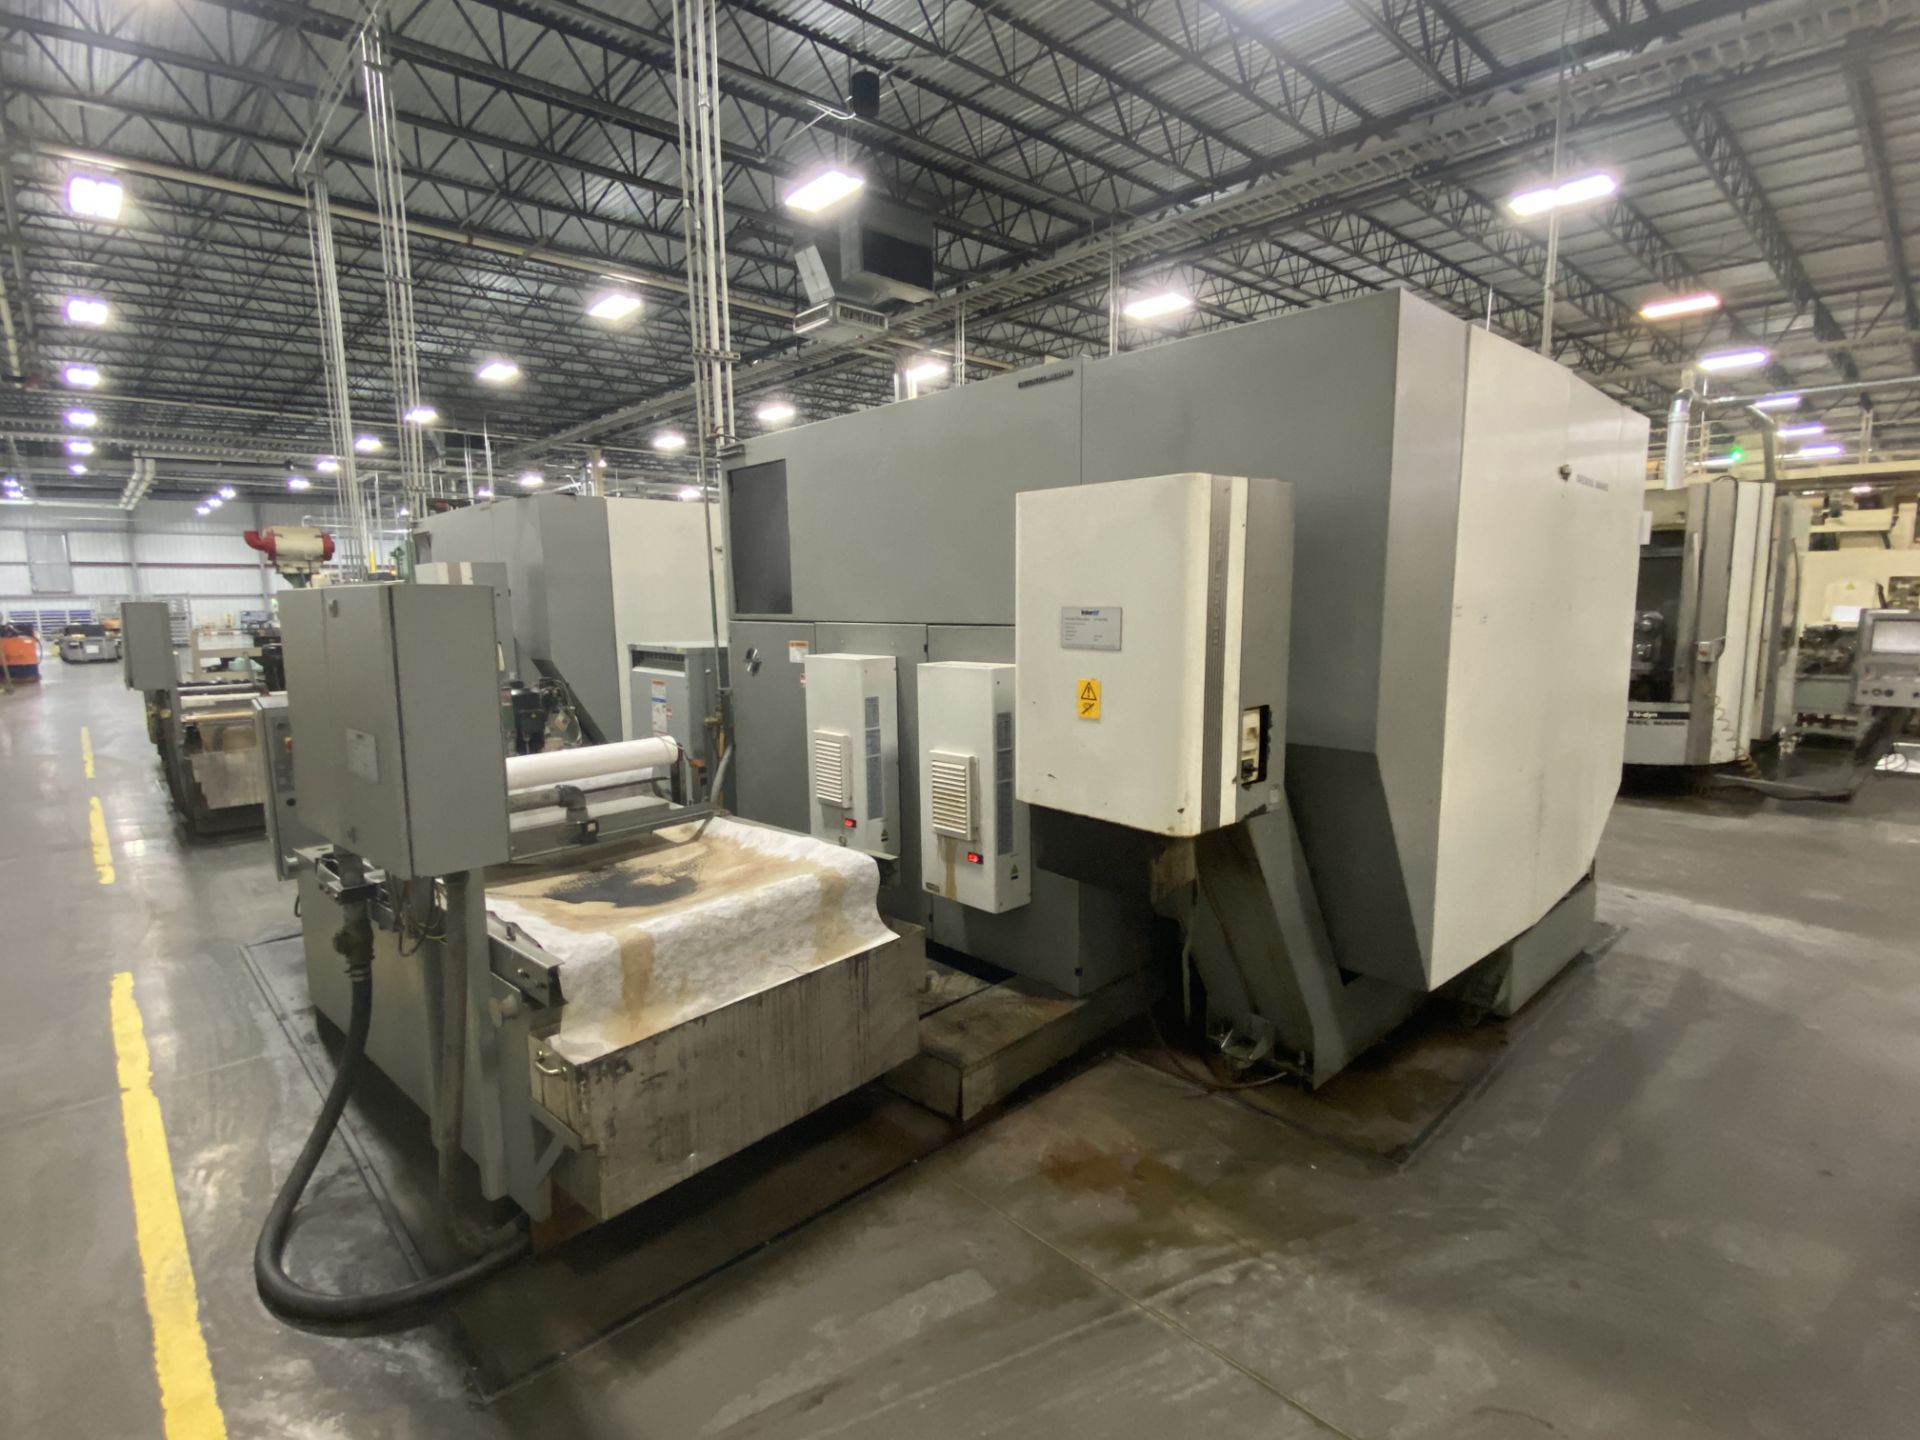 DMG 60T 5-Axis CNC Vertical Machining Center, S/N 1143-000061-3, 2004, with 25" x 20" Table, HSK - Image 5 of 17